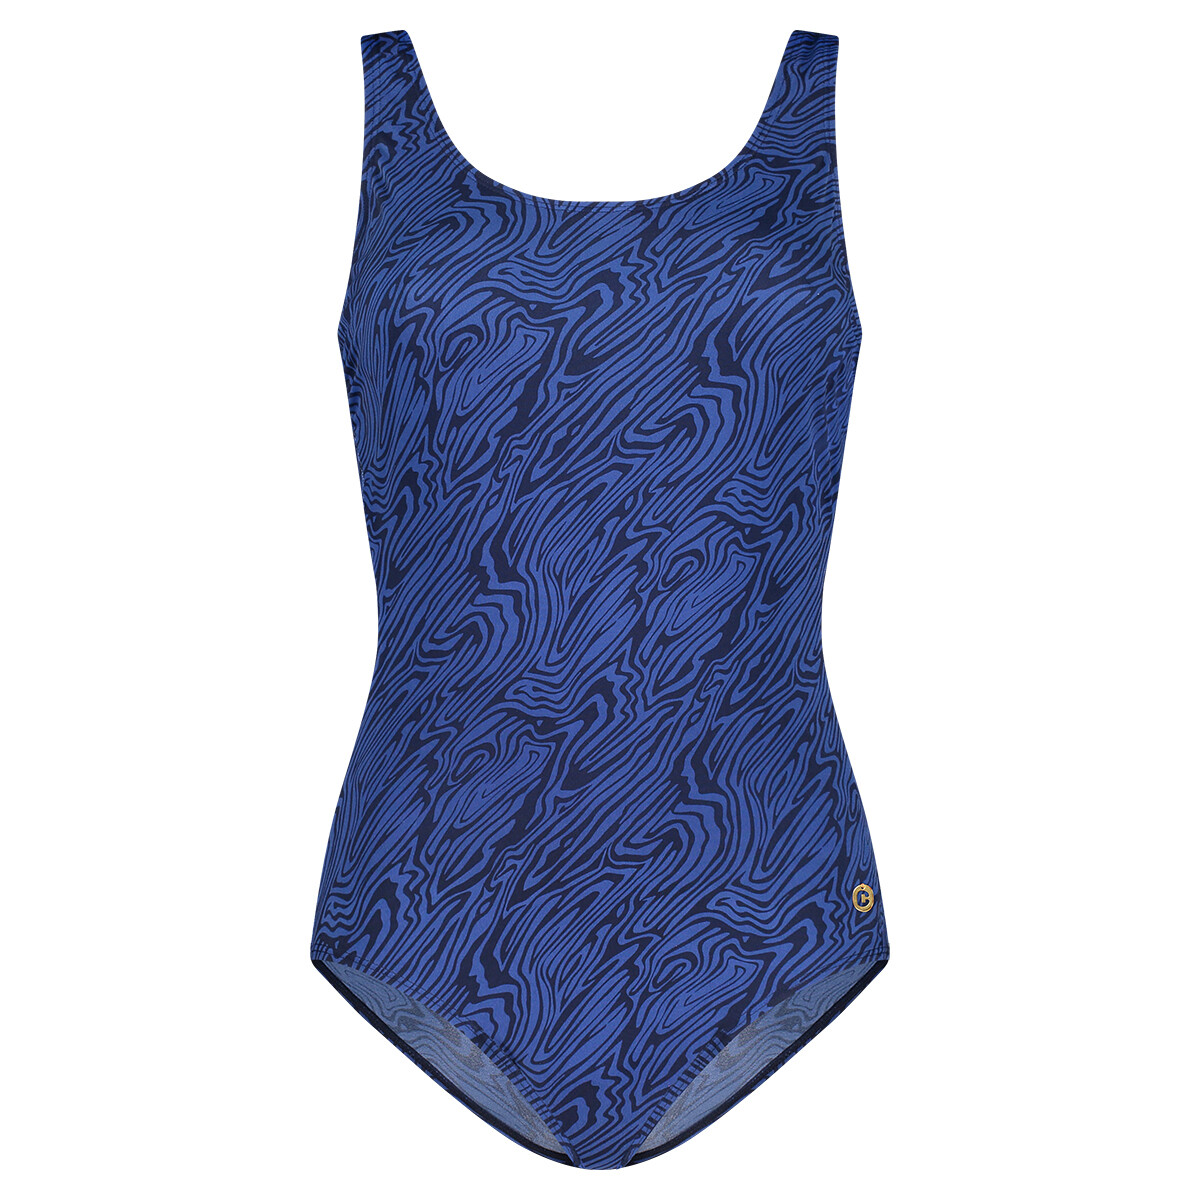 Ten Cate Swimsuit lining cup 5057 60007